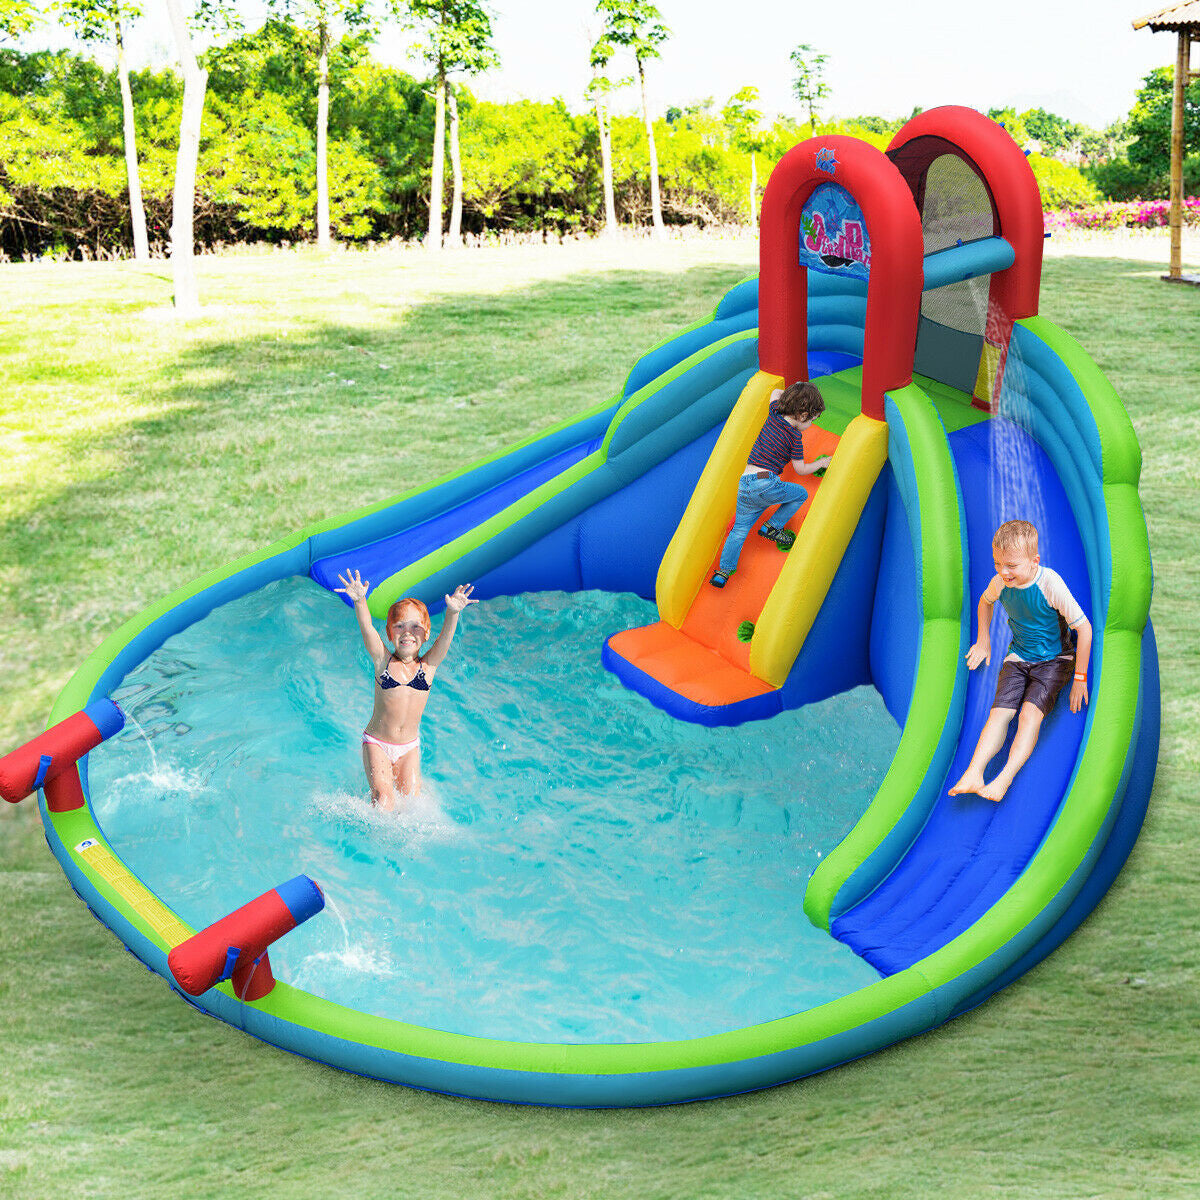 Inflatable Water Slide Bounce House with Splash Pool and Carrying Bag Without Blower